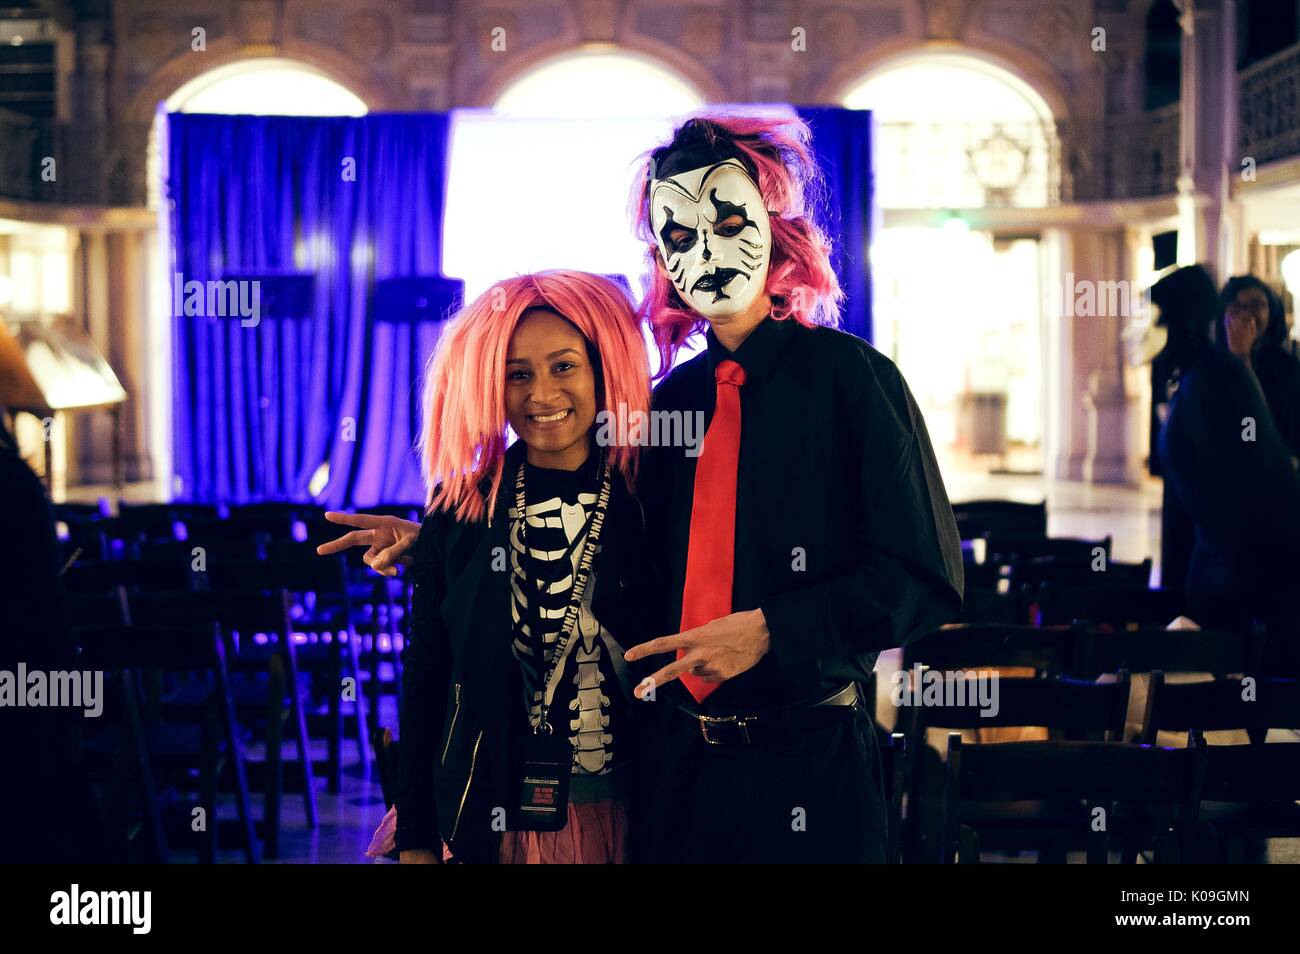 Two college students are posing for a picture, the girl is wearing a pink wig and a shirt with a skeleton's body on it while the boy is also wearing a pink wig, he is also wearing a face mask, a full black outfit and a red tie, Halloween at Johns Hopkins University's George Peabody Library, 2015. Courtesy Eric Chen. Stock Photo